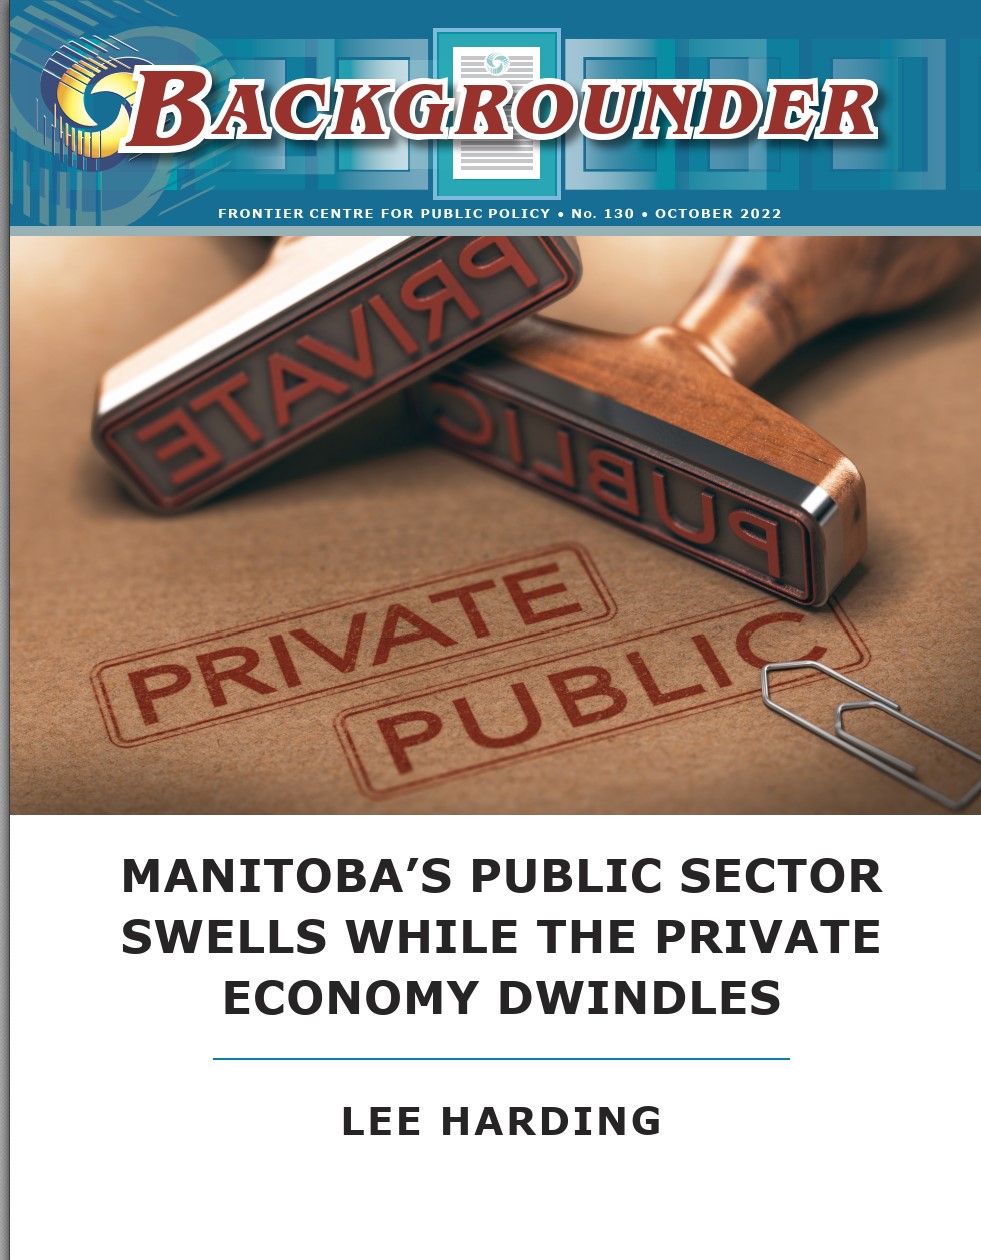 Manitoba’s Public Sector Swells While the Private Economy Dwindles